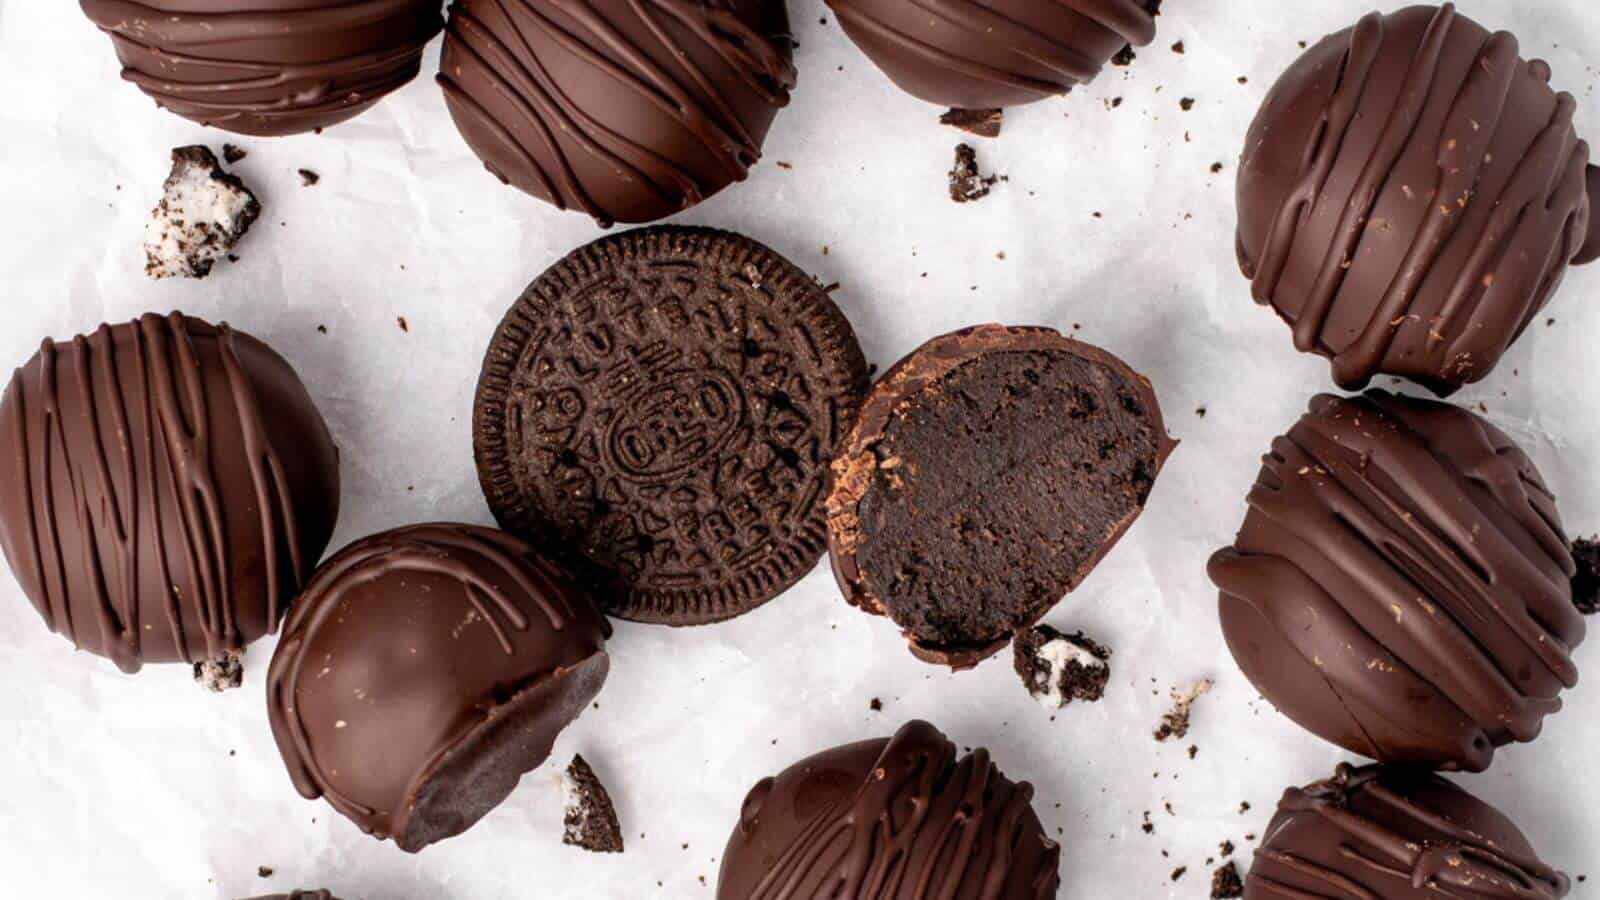 Oreo truffles laid out on a counter.